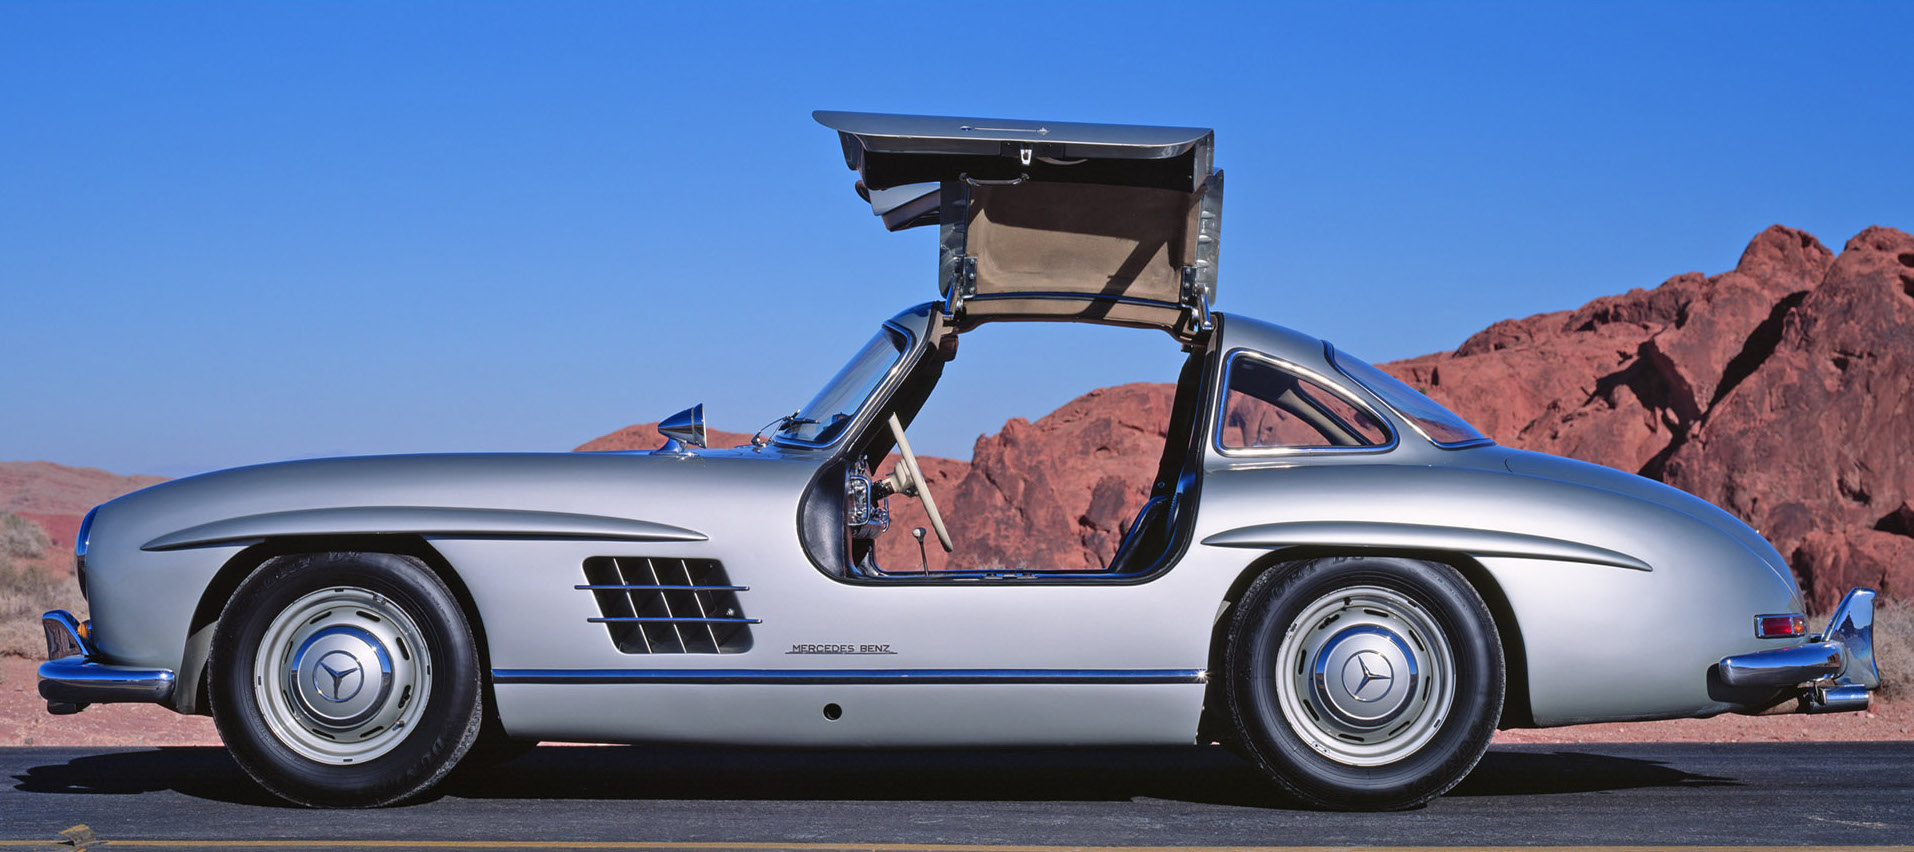 Mercedes-Benz-300-SL-Coupe-Side-DO-1920x1440.jpg